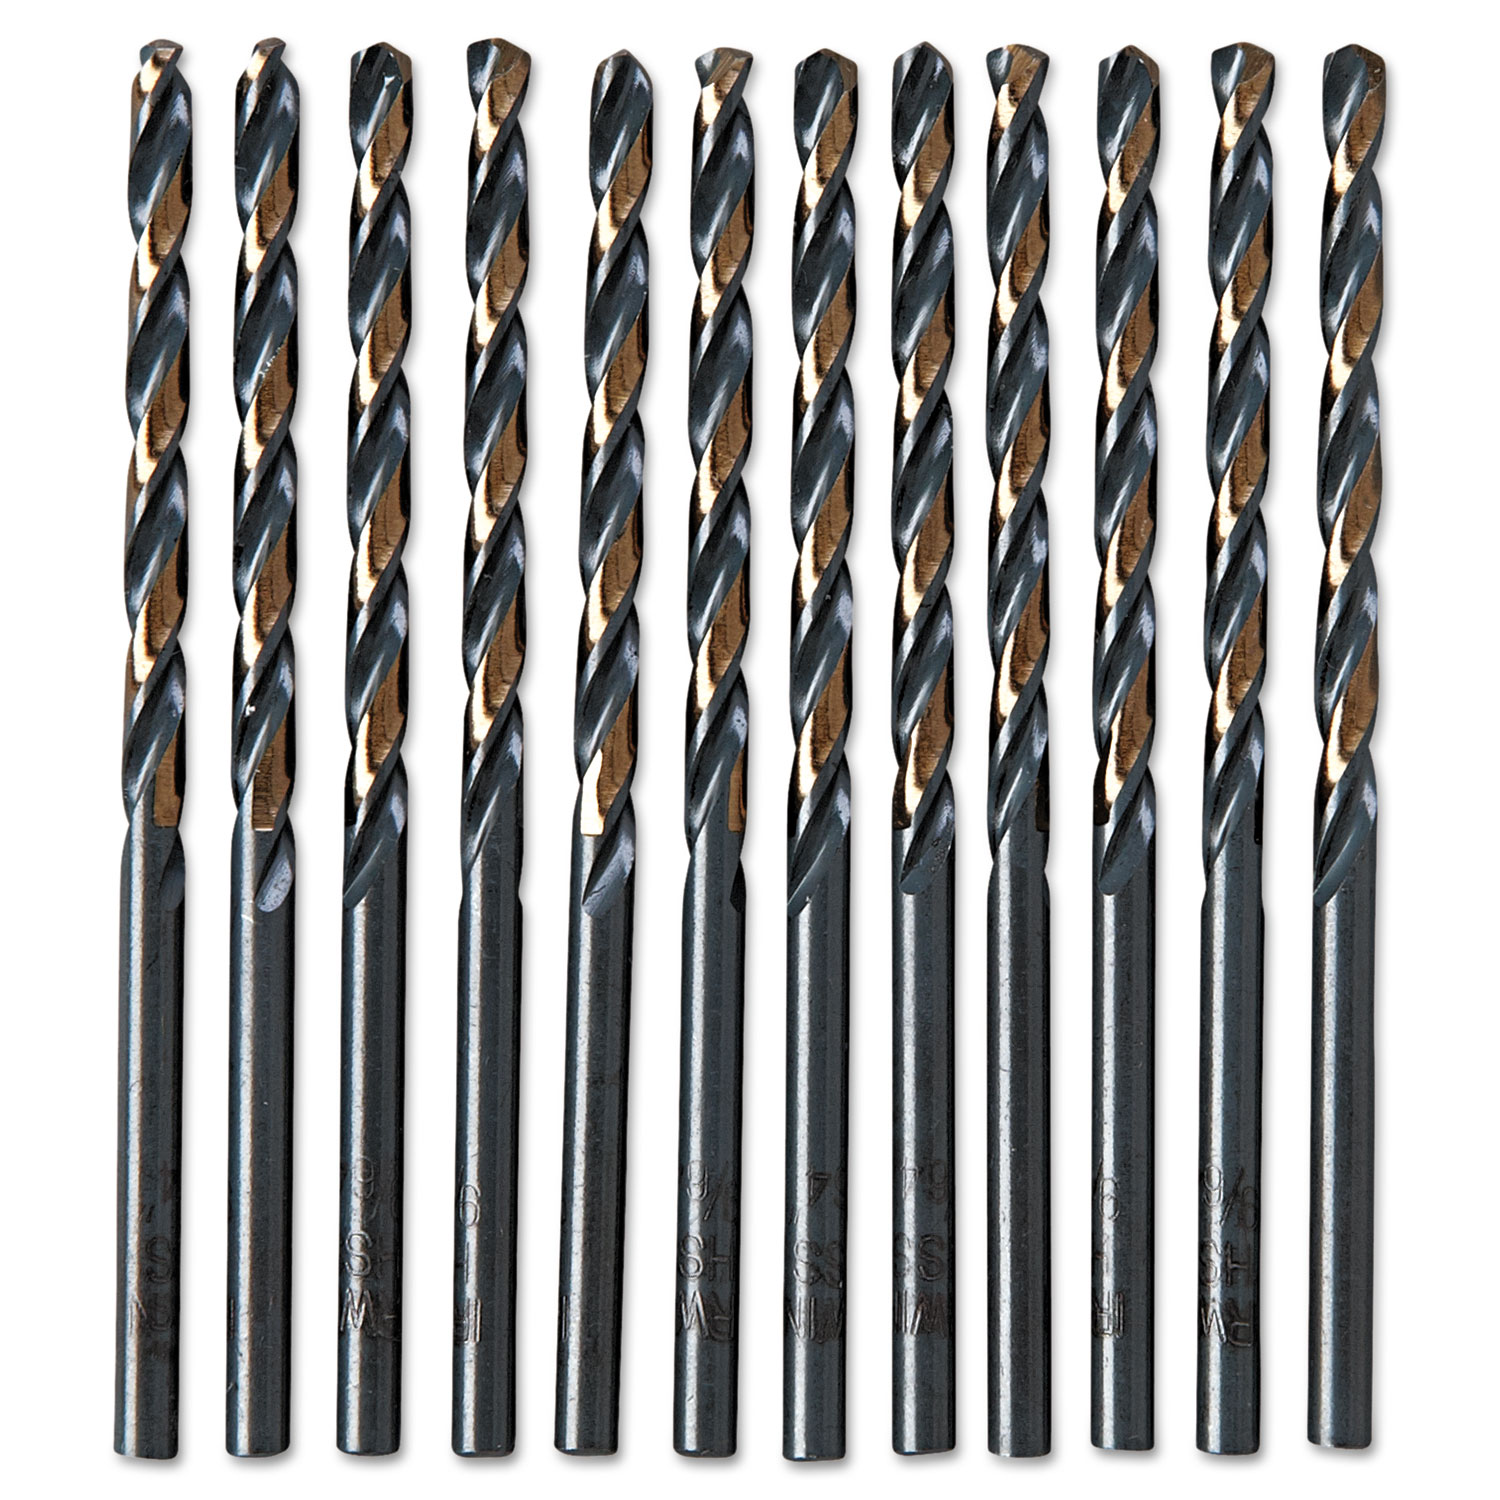 Black and Gold HSS Fractional Drill Bit, 9/64, 135 Degrees